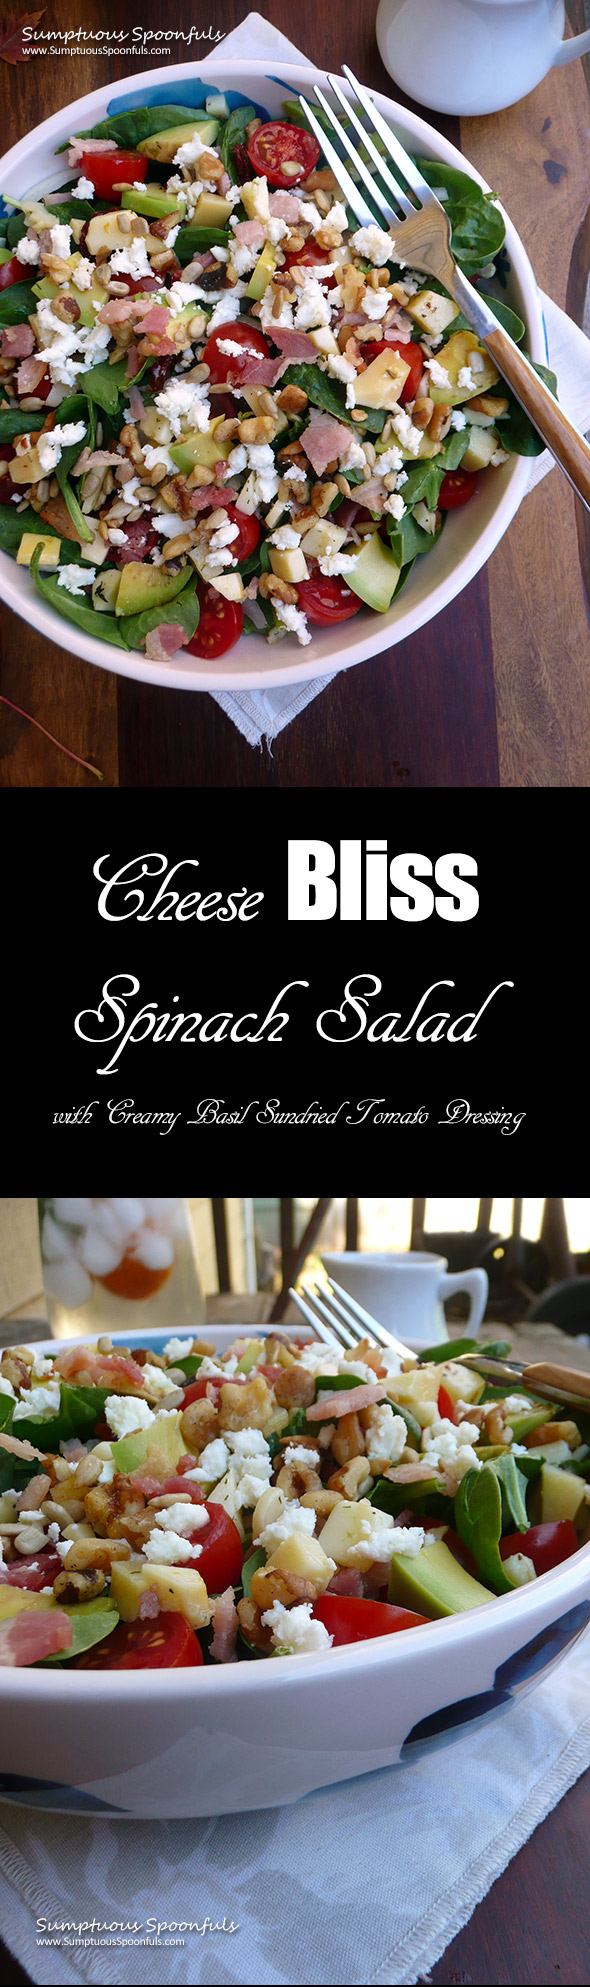 Cheese Bliss Spinach Salad ~ Marinated cheeses on a bed of fresh spinach with avocado, onion, fresh tomato, toasted walnuts, bacon (optional) and a basil sun dried tomato dressing. It''s pure bliss in salad form!